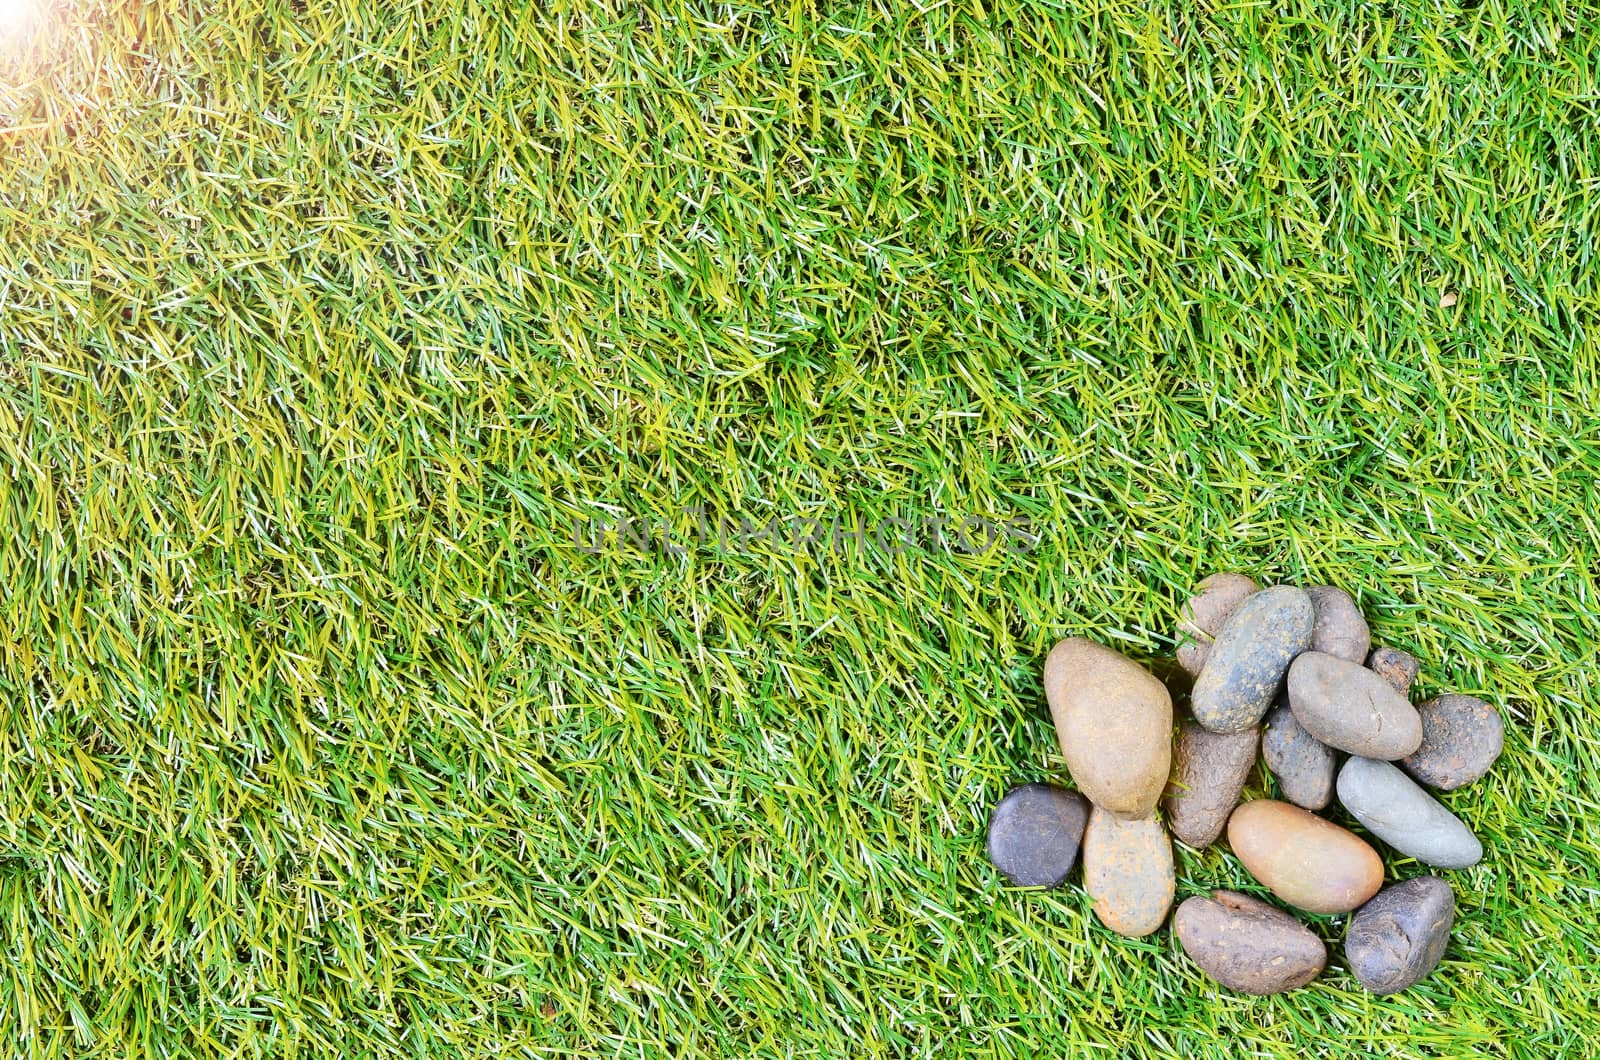 small stone on grass background